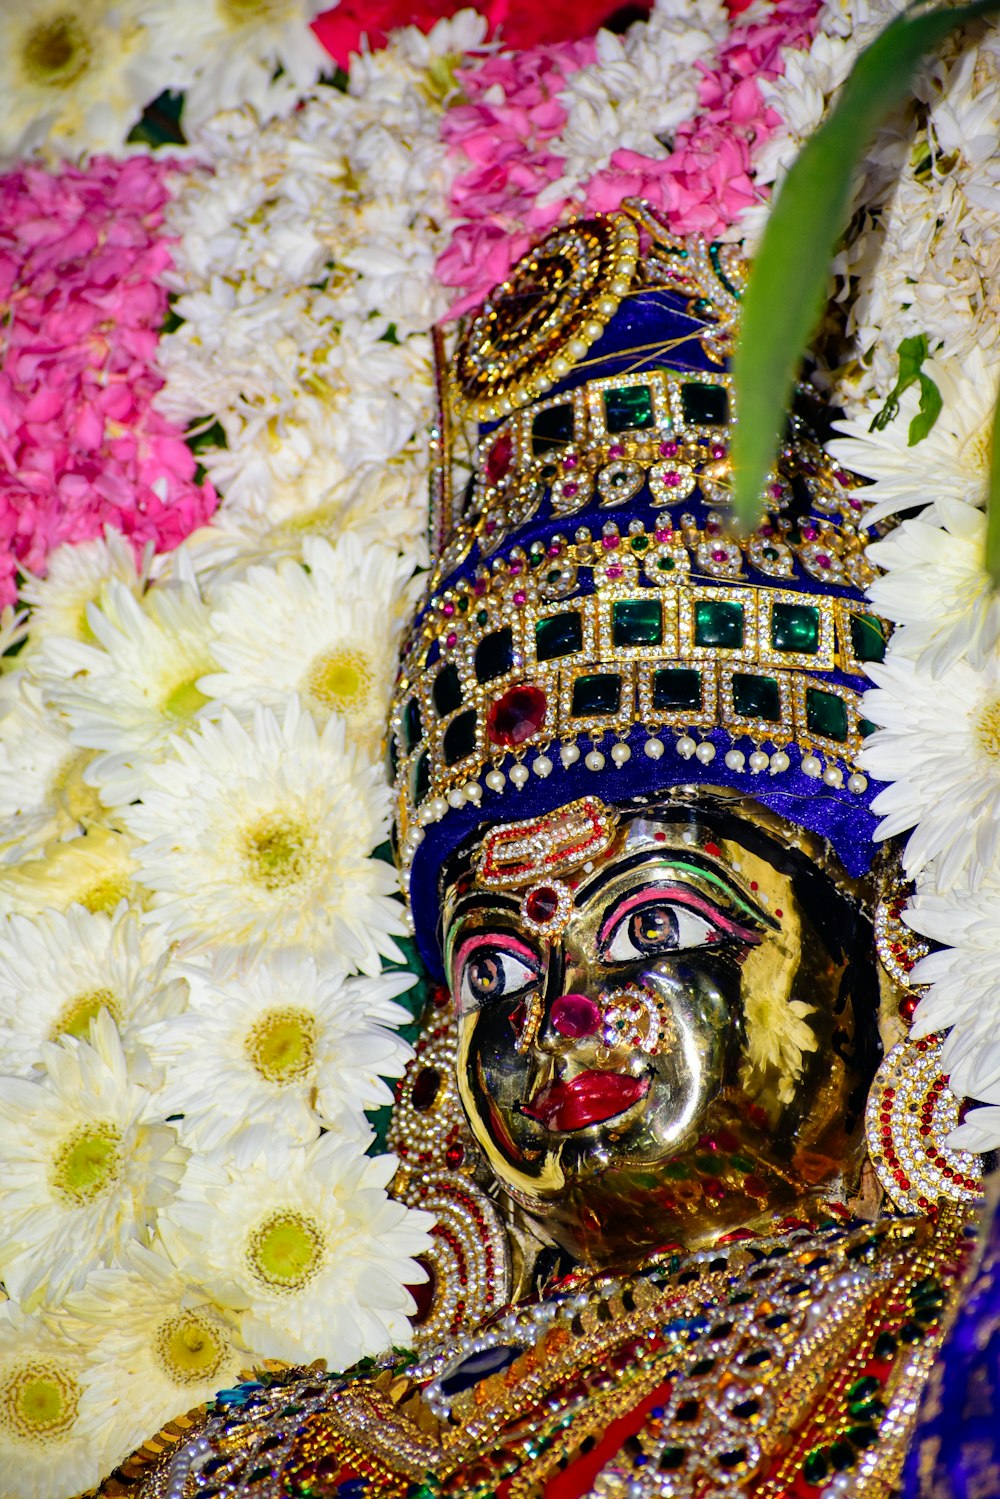 a close up of a statue of a person surrounded by flowers